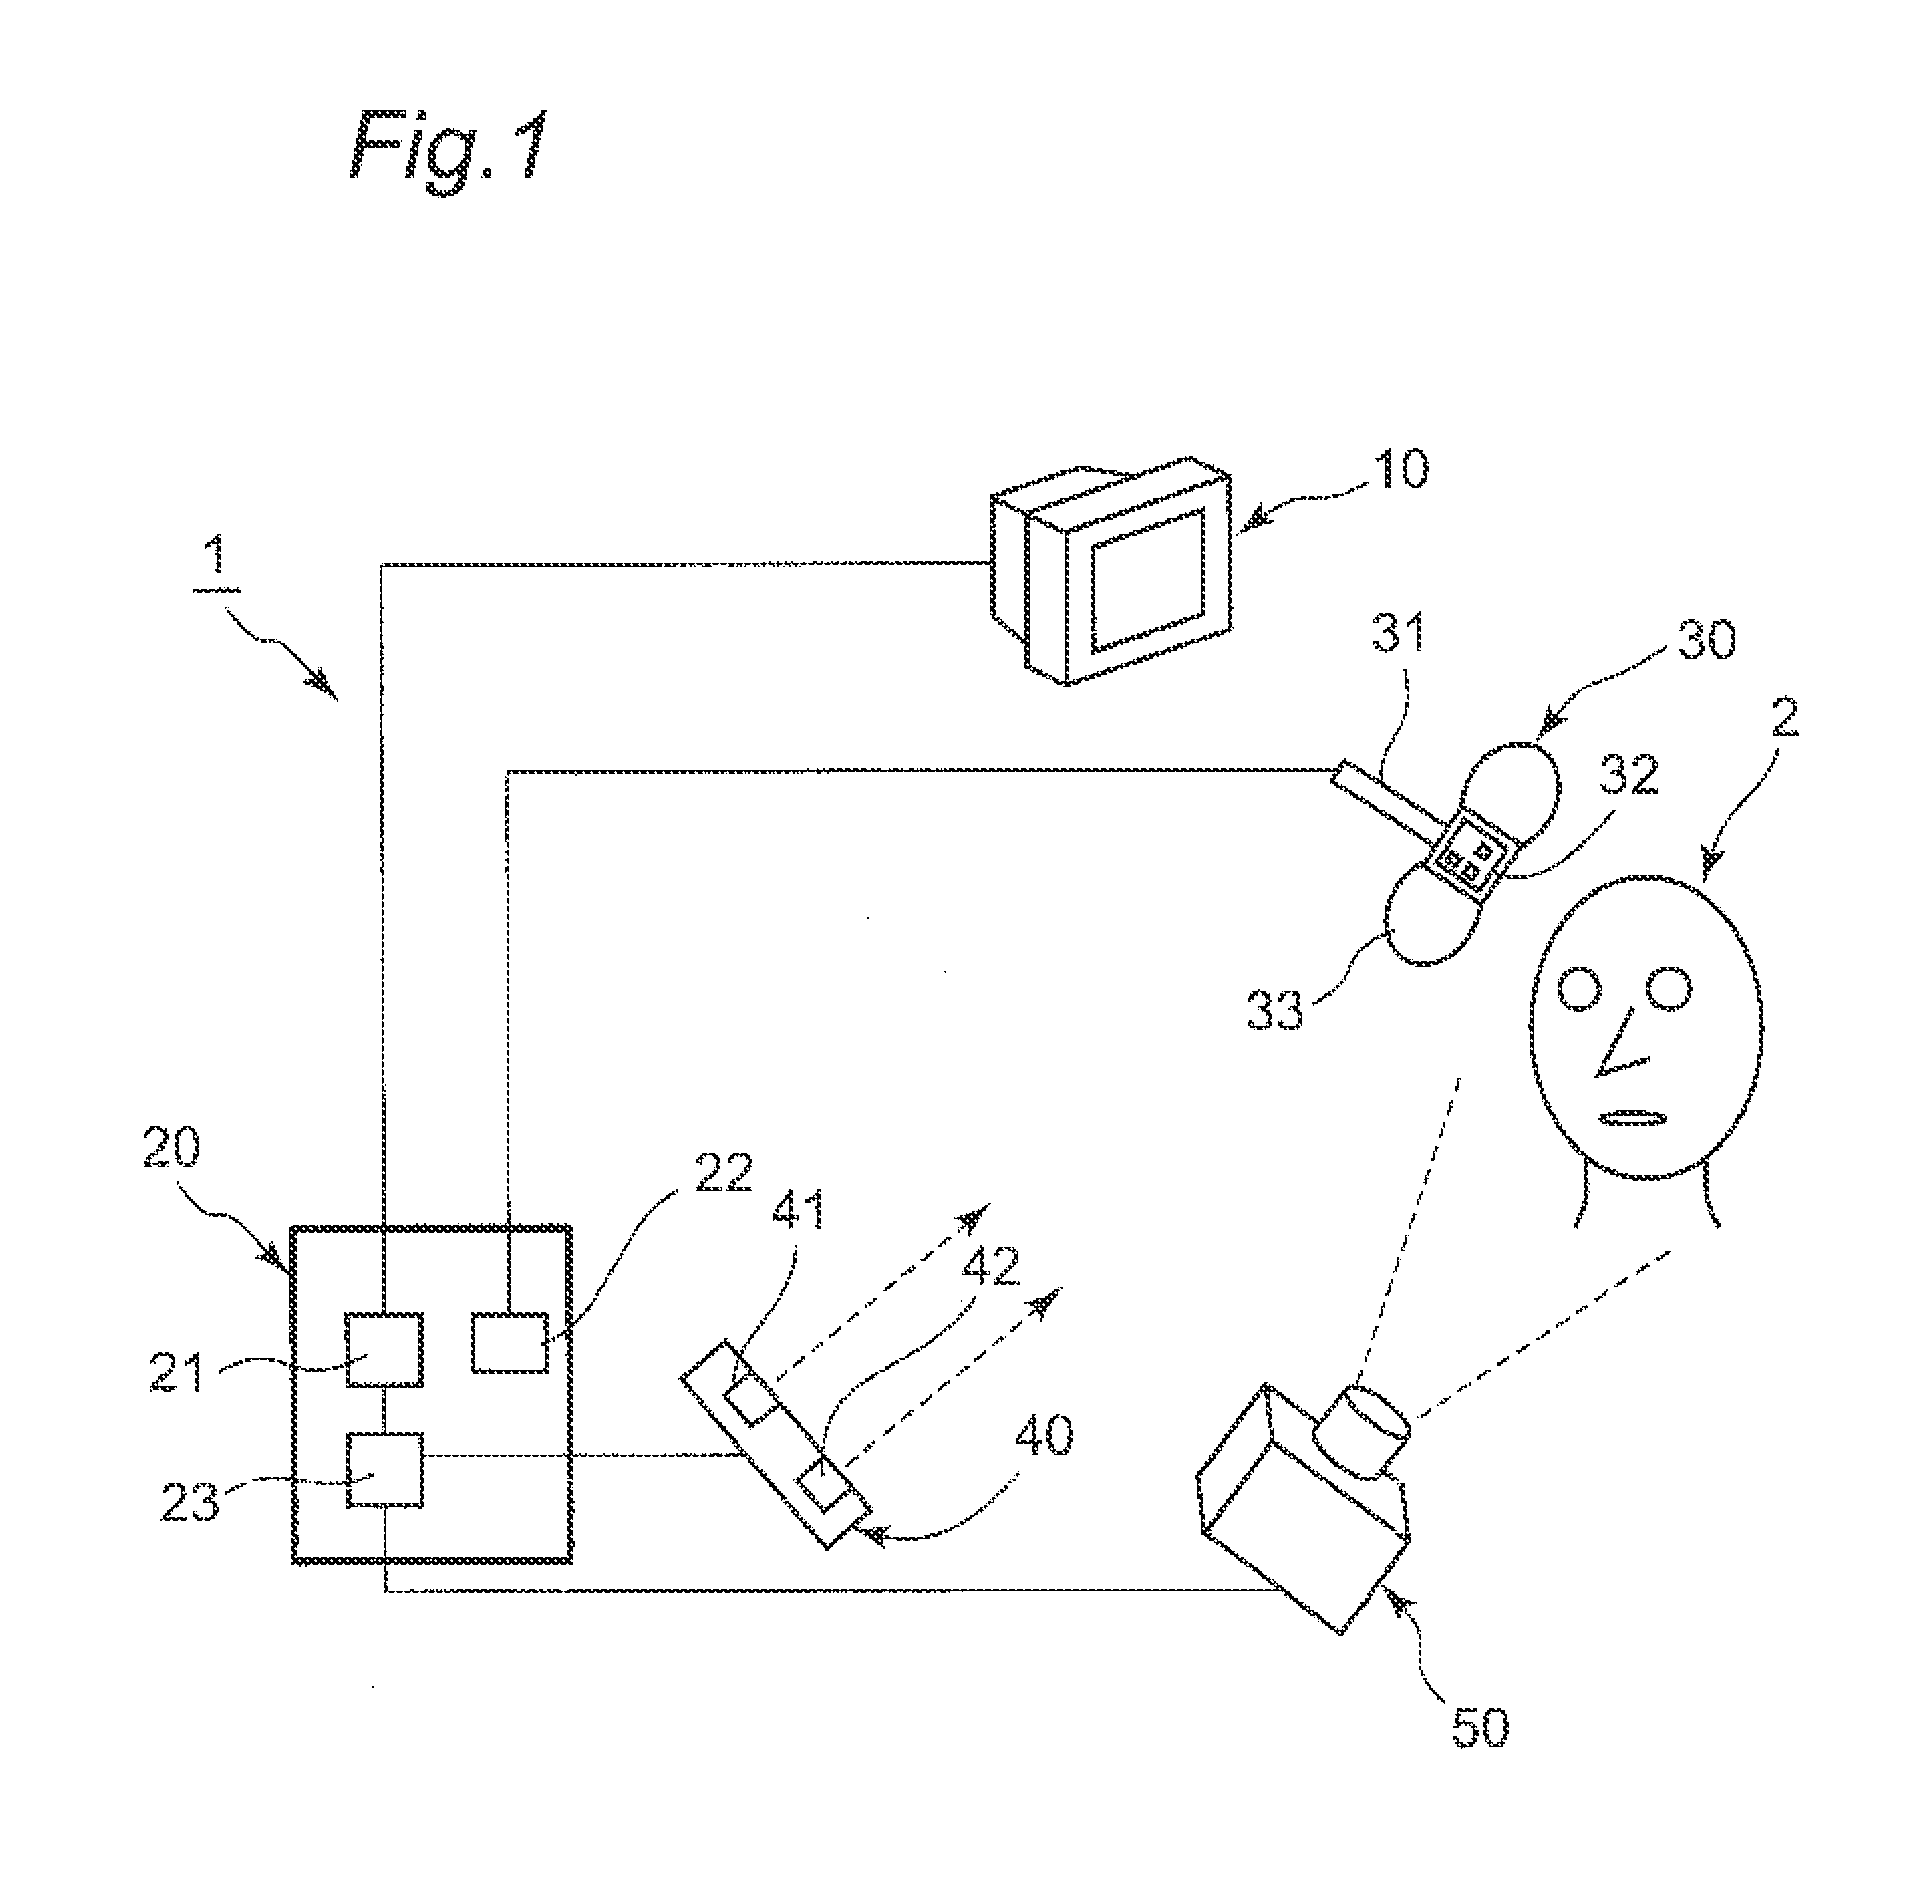 Image data processing device and transcranial magnetic stimulation apparatus